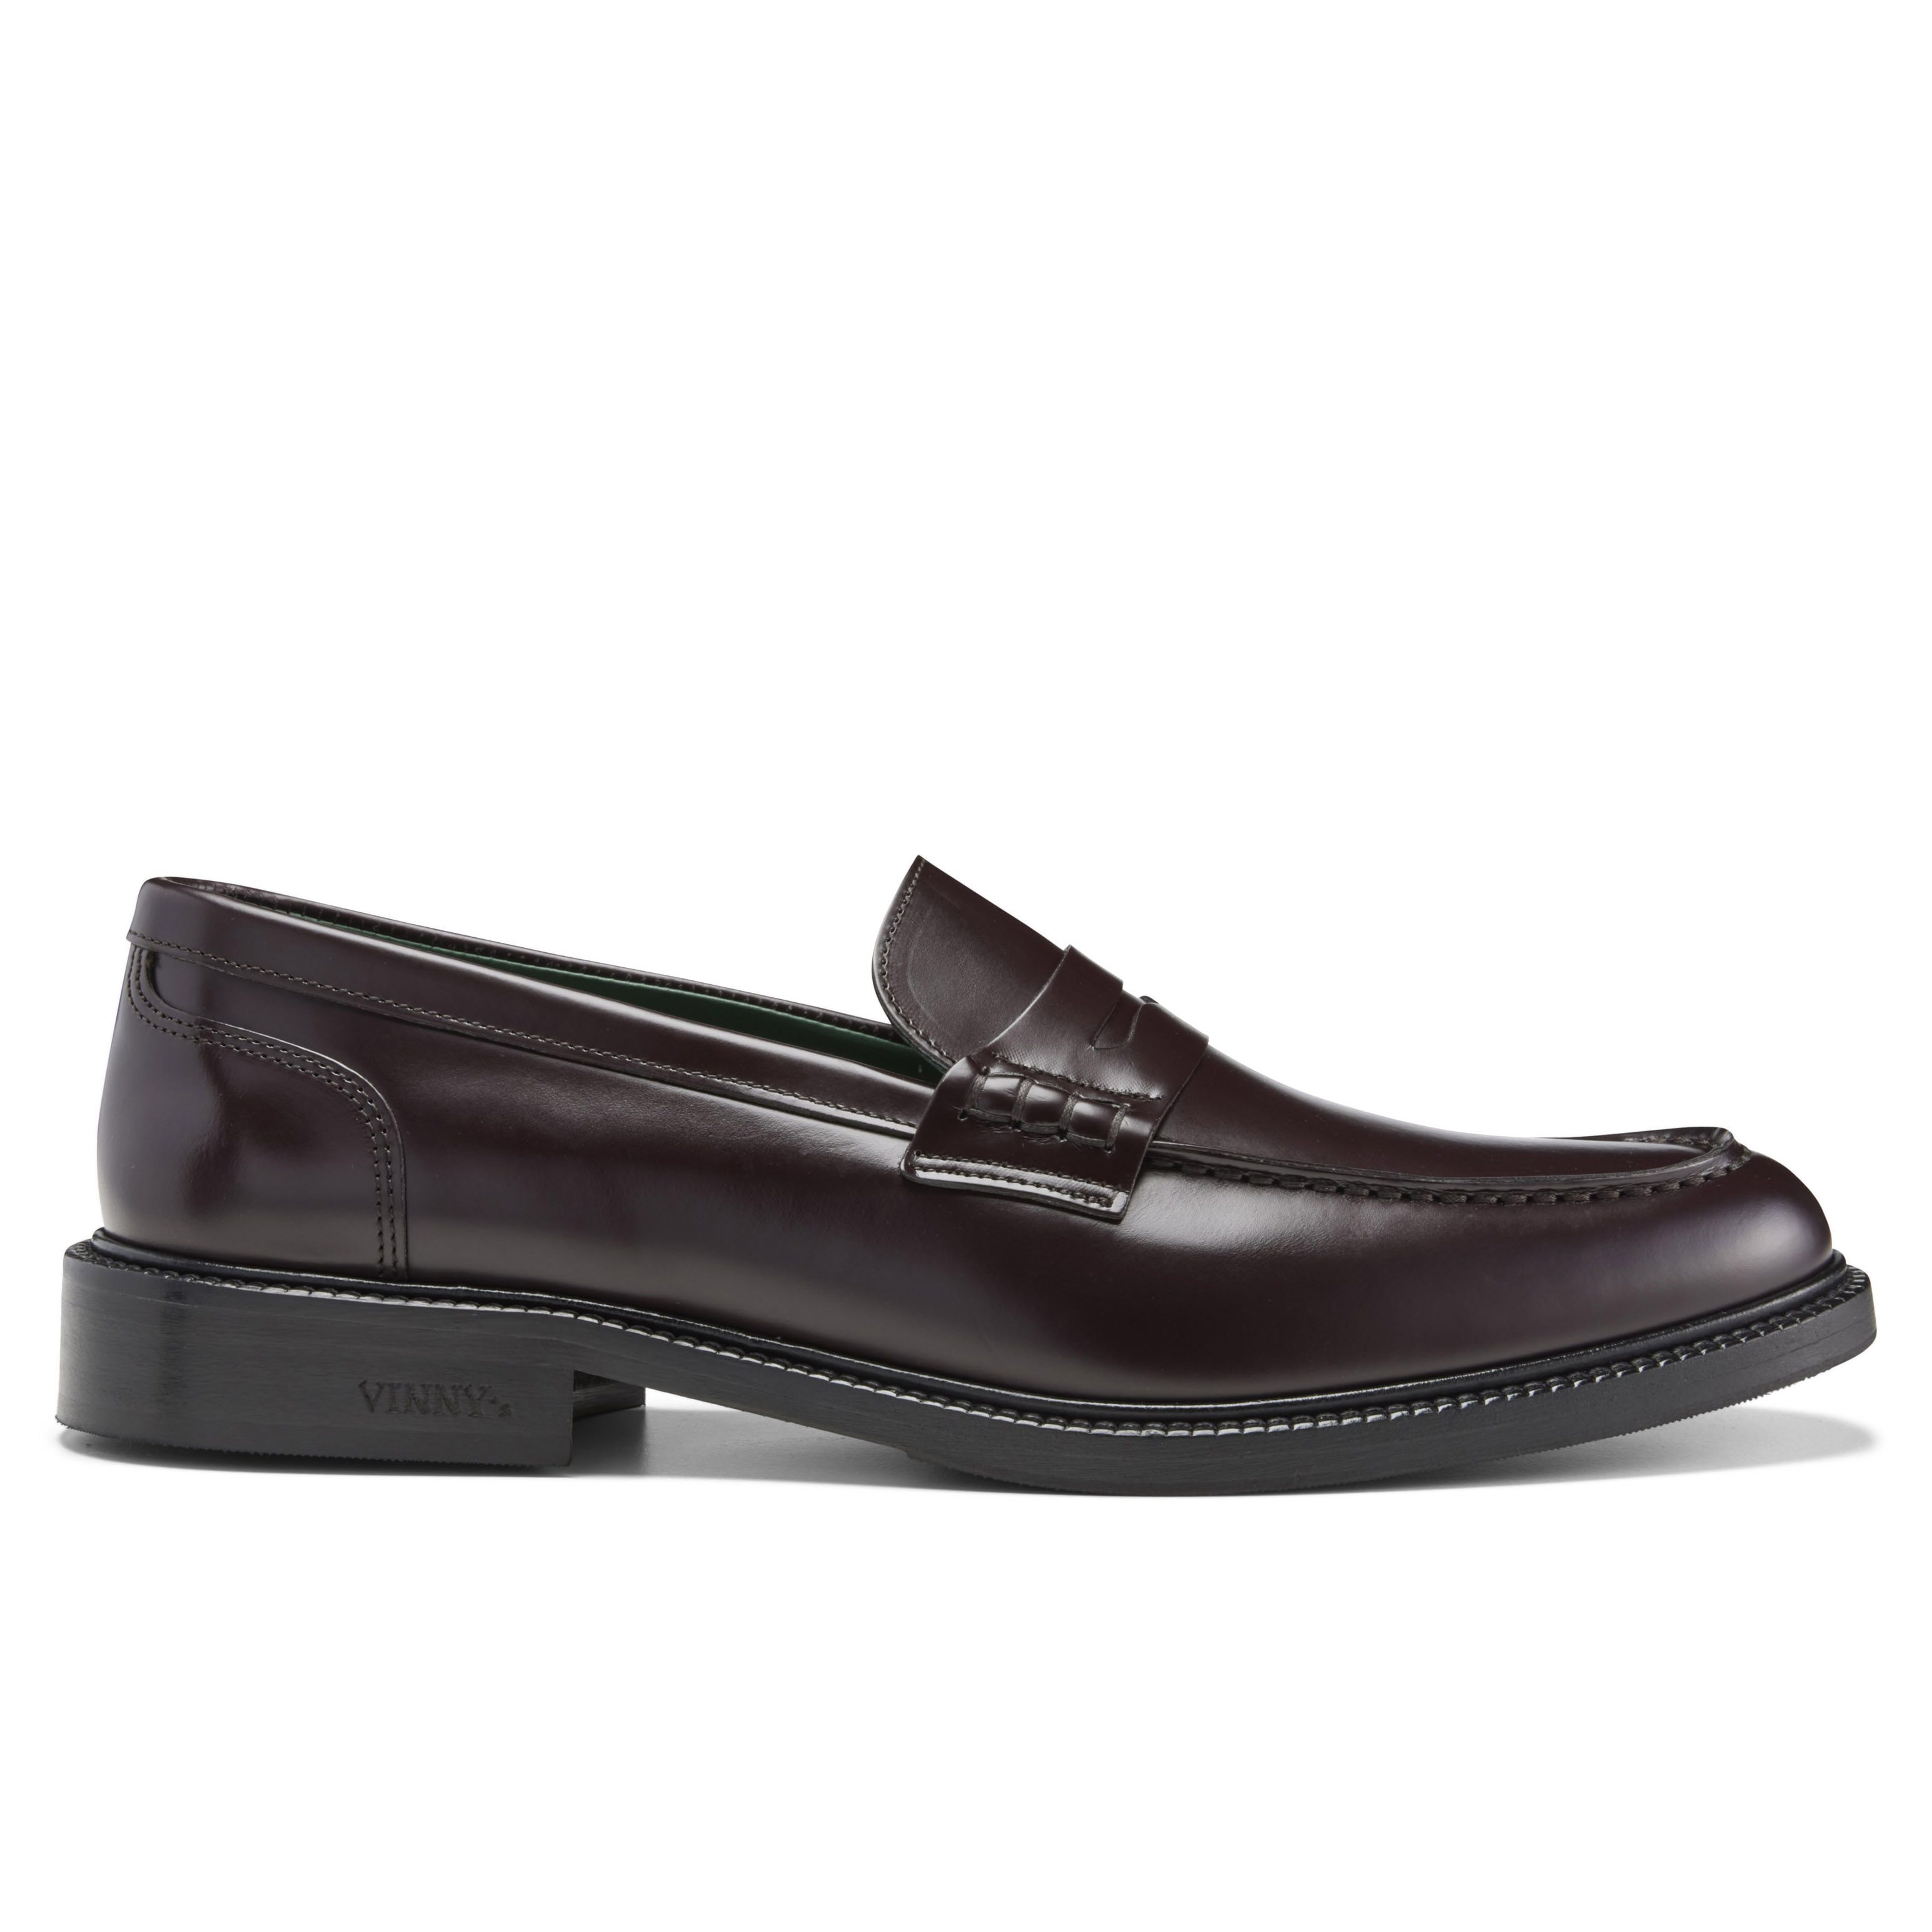 Vinny's Richee Penny Loafer - Brown Crust Leather | Loafers 